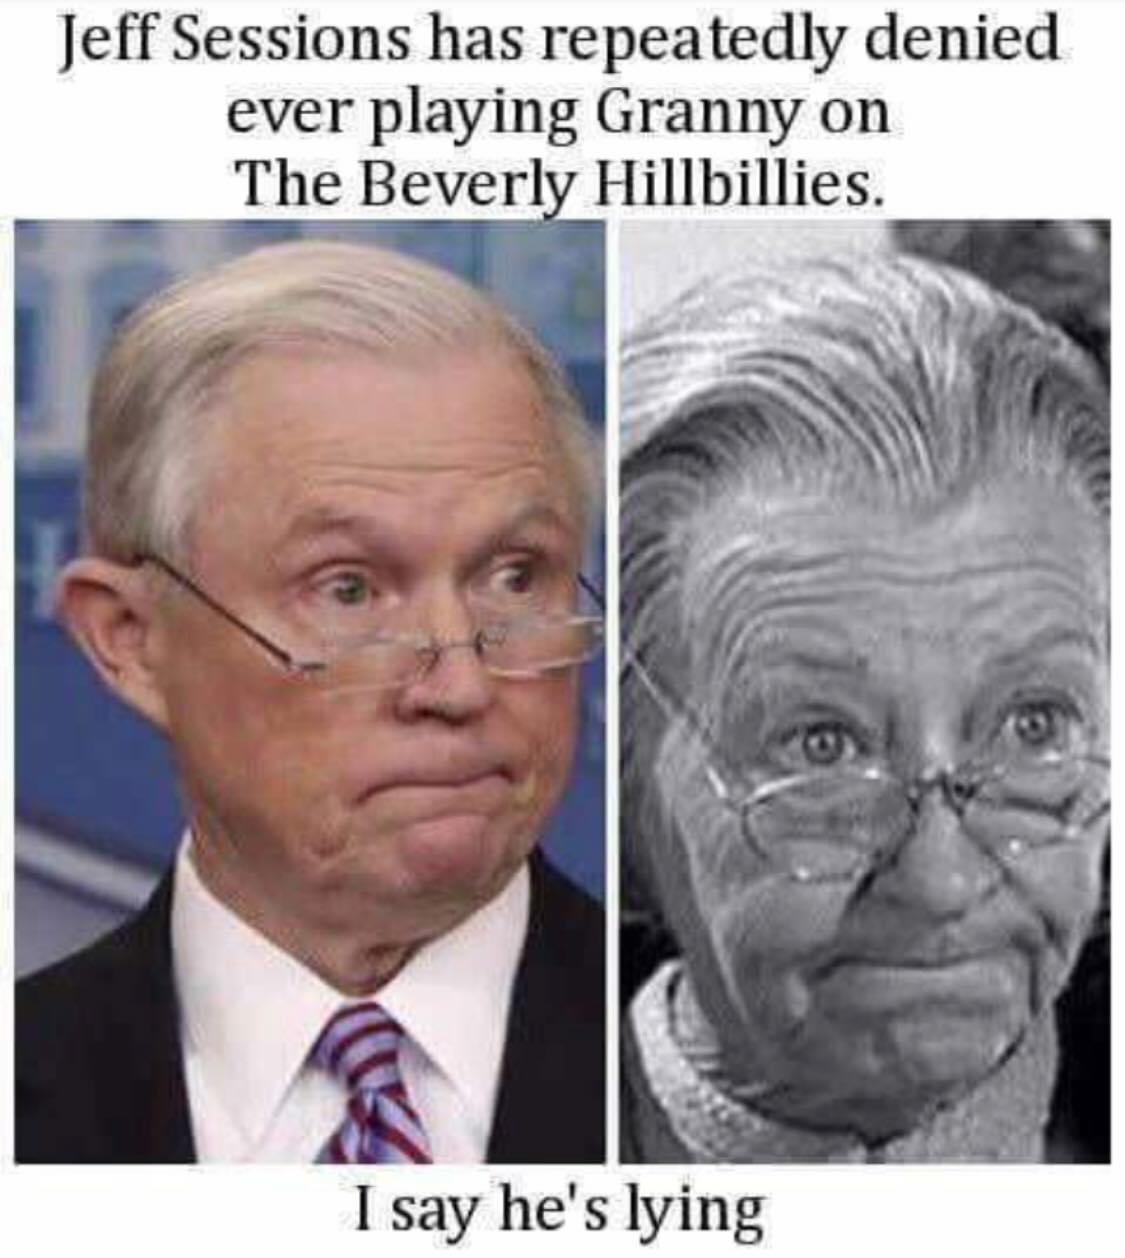 Jeff Sessions has repeatedly denied ever playing Granny on The Beverly Hillbillies. I say he's lying